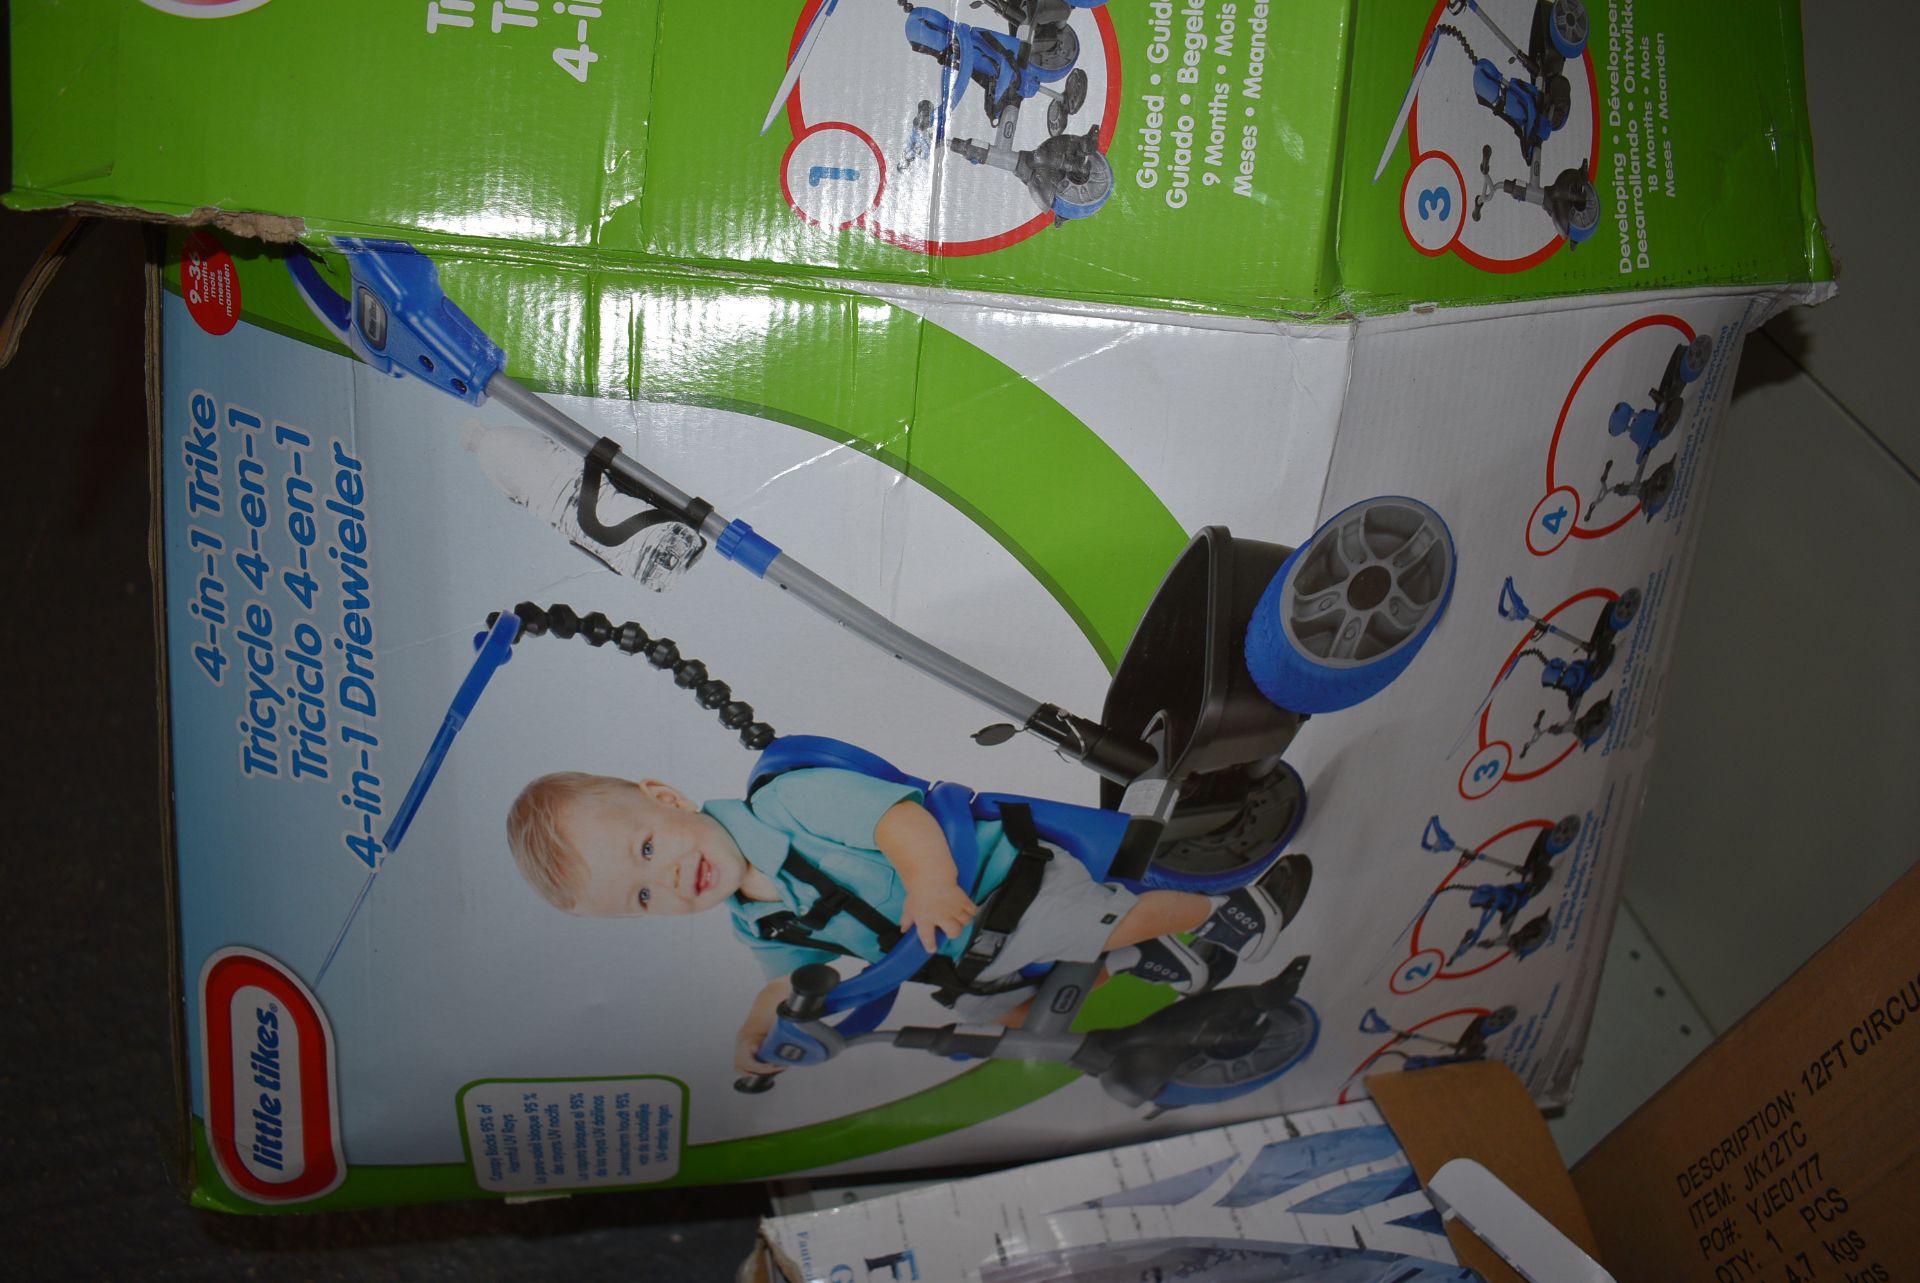 Little Tikes 4-in-1 Tricycle (blue) - Image 2 of 4